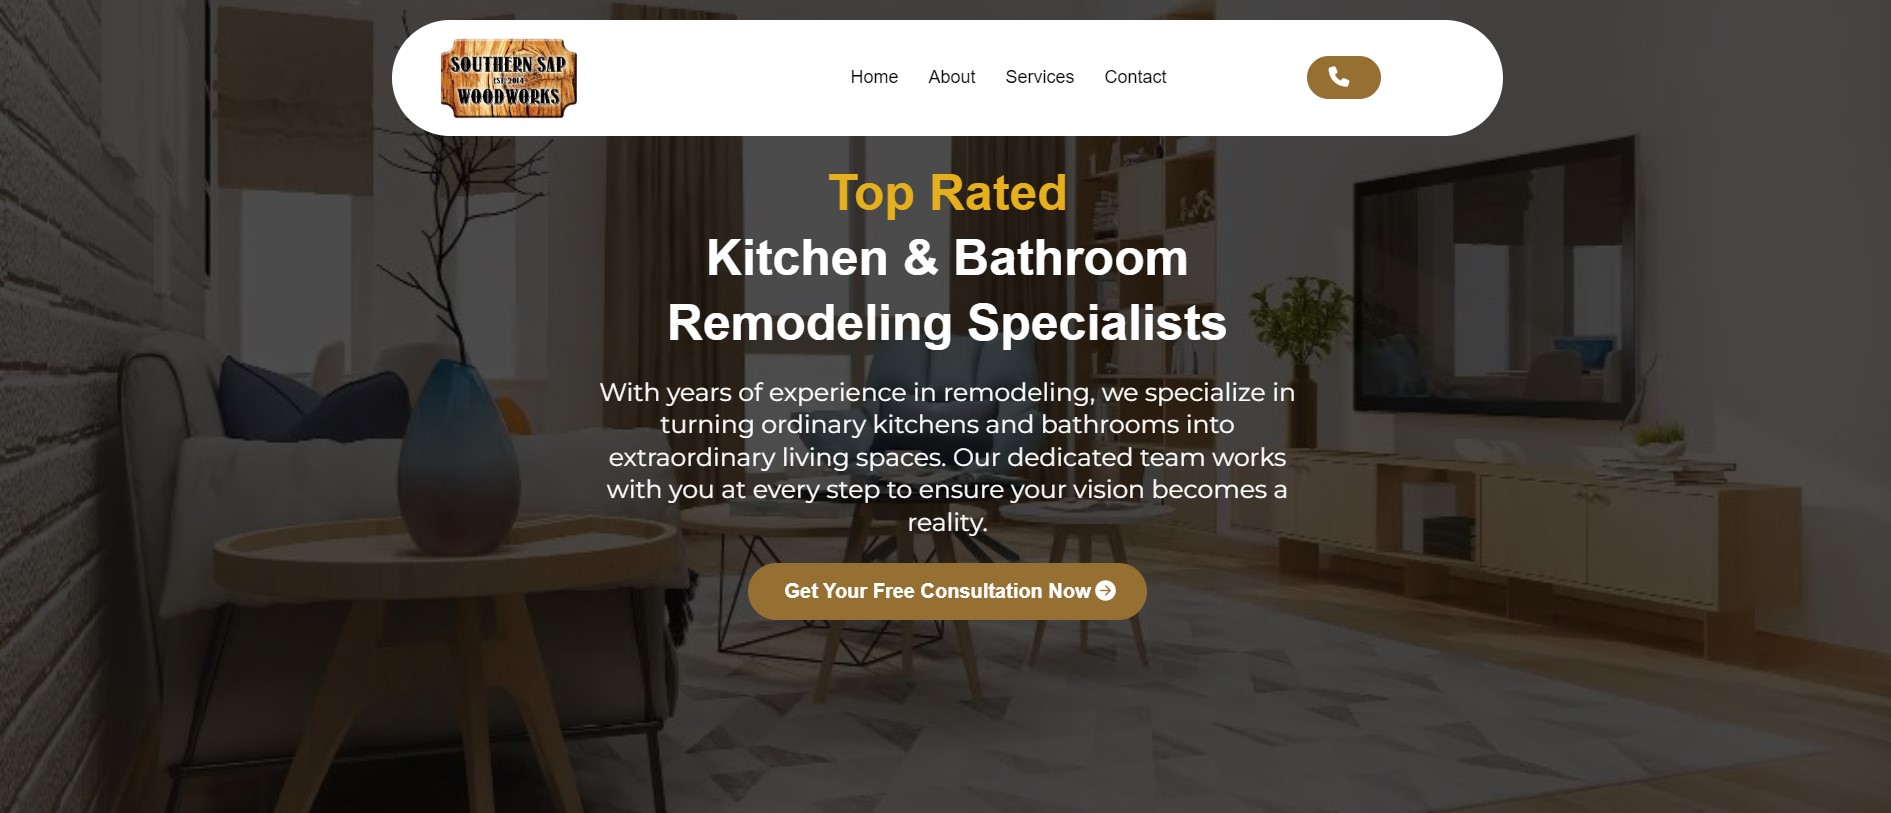 Screenshot of Southern Sap Woodworks website homepage, showcasing their services as top-rated kitchen and bathroom remodeling specialists. The banner features an elegantly designed living room with a plush sofa, a wooden coffee table, decorative vases, and a mounted television, highlighting the quality of their craftsmanship. A call-to-action button invites visitors to get a free consultation.